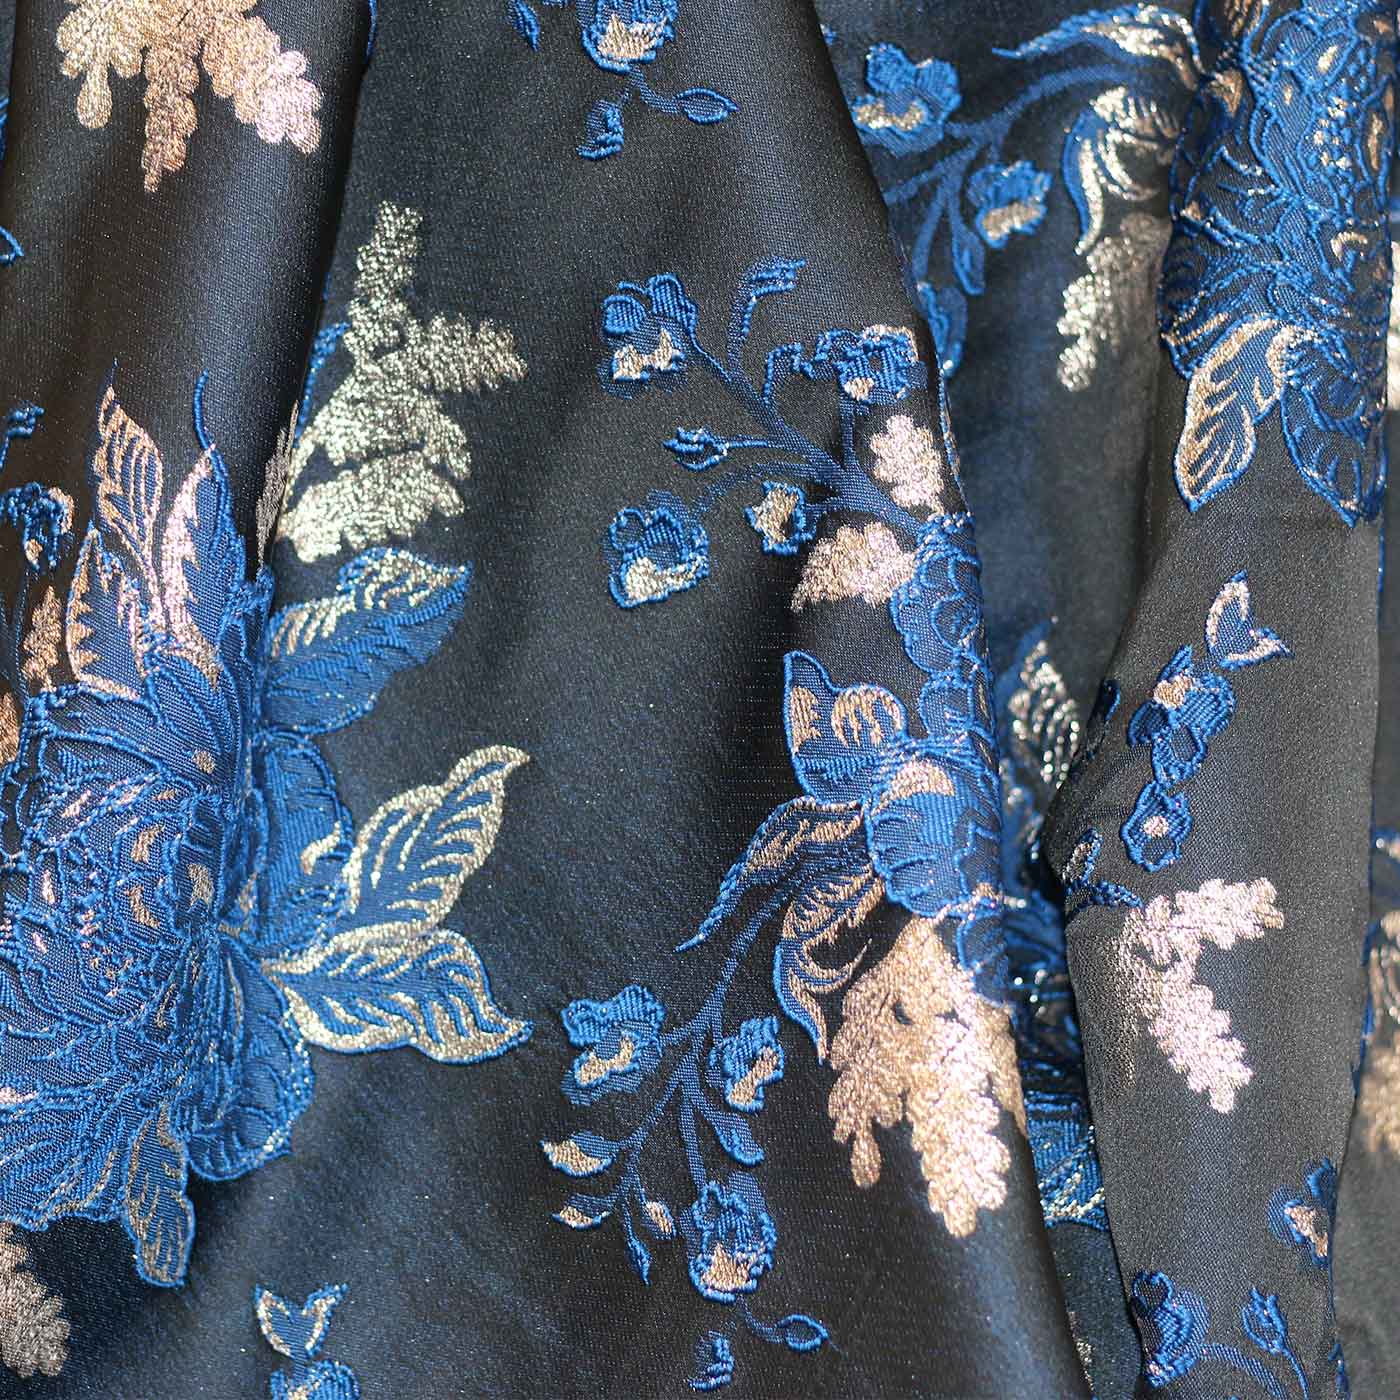 Royal Blue and Gold Floral Brocade